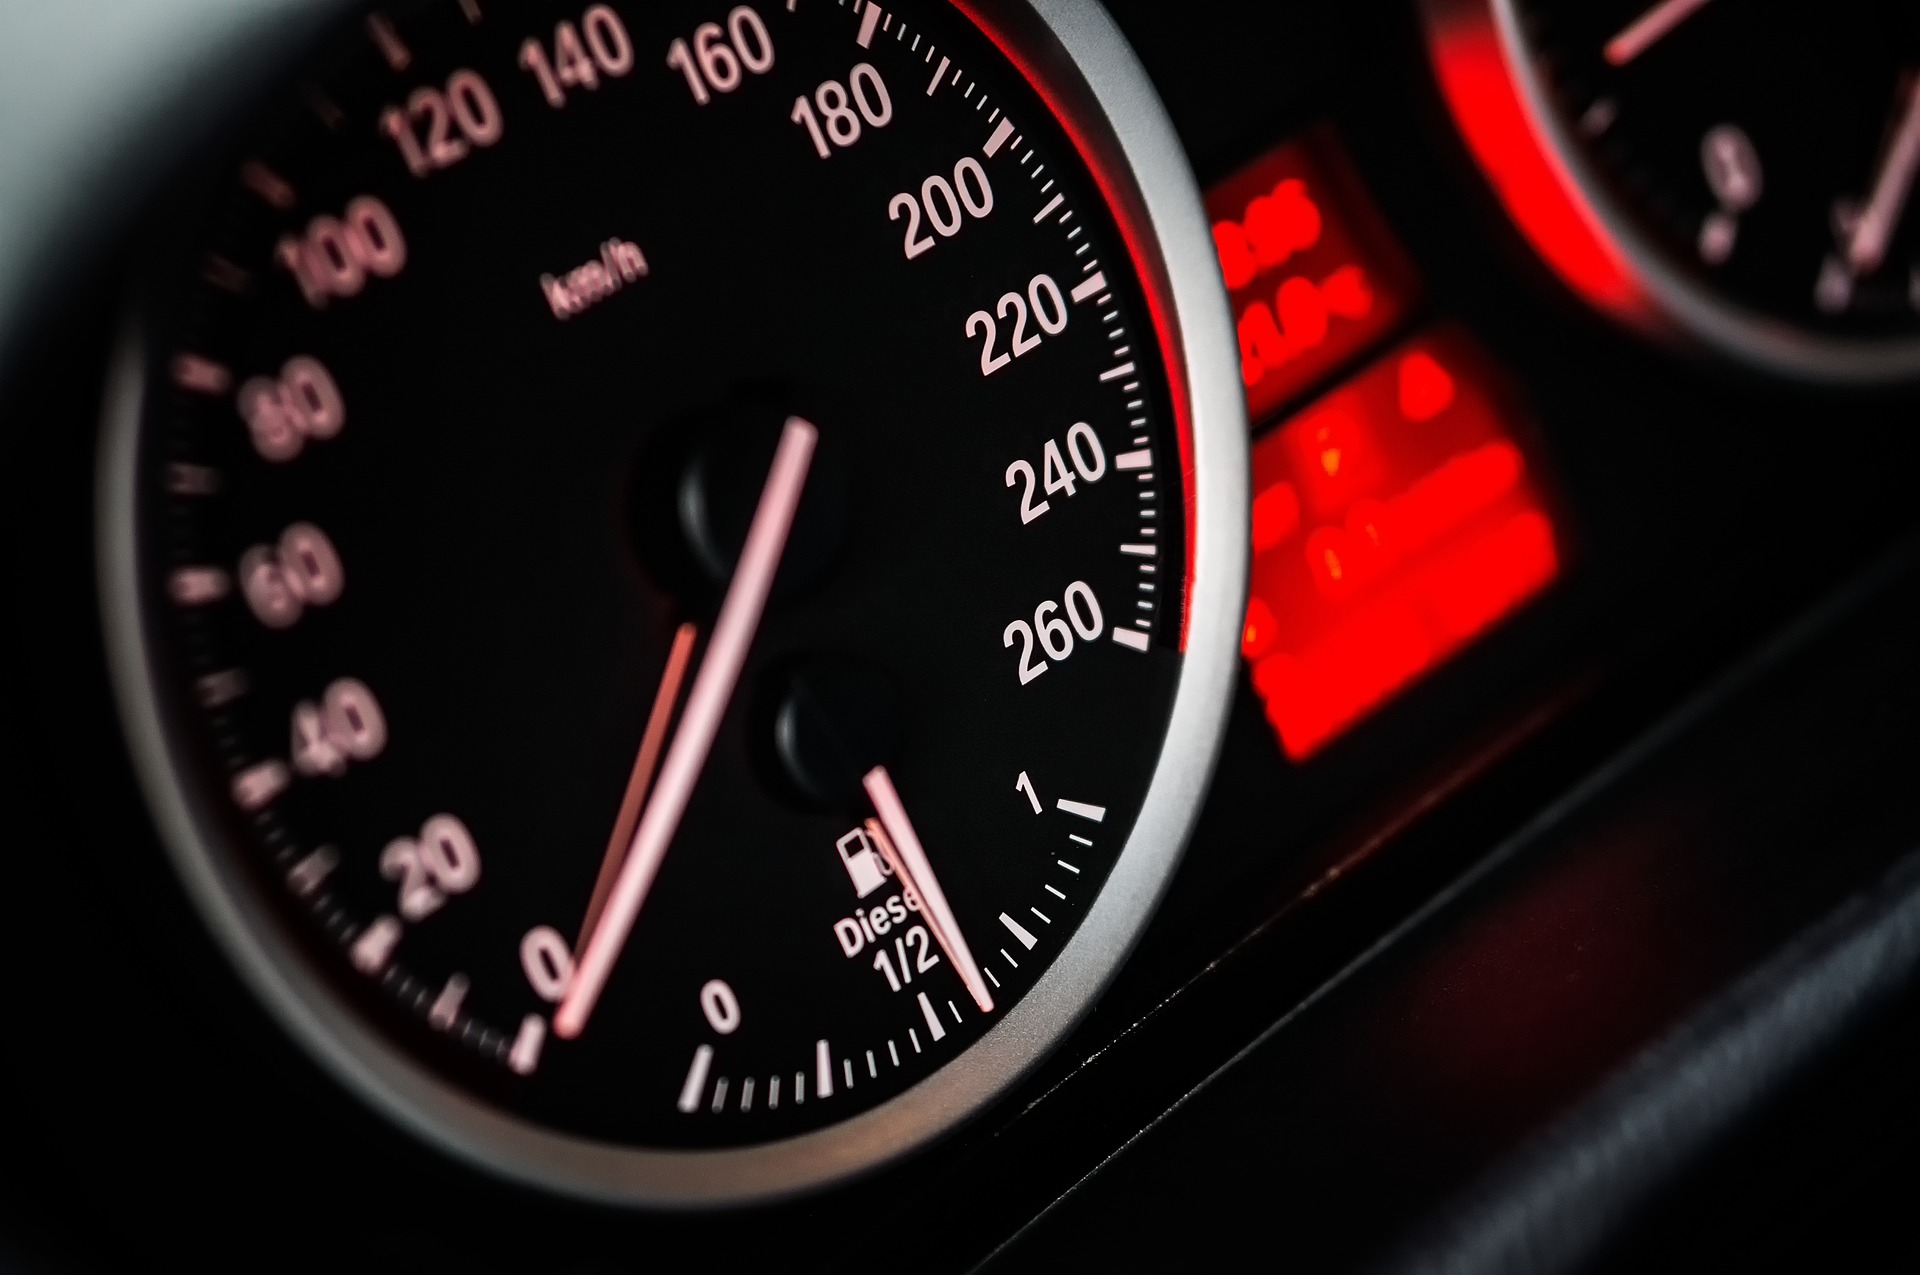 Top 10 Ways to Speed Up Your Blog